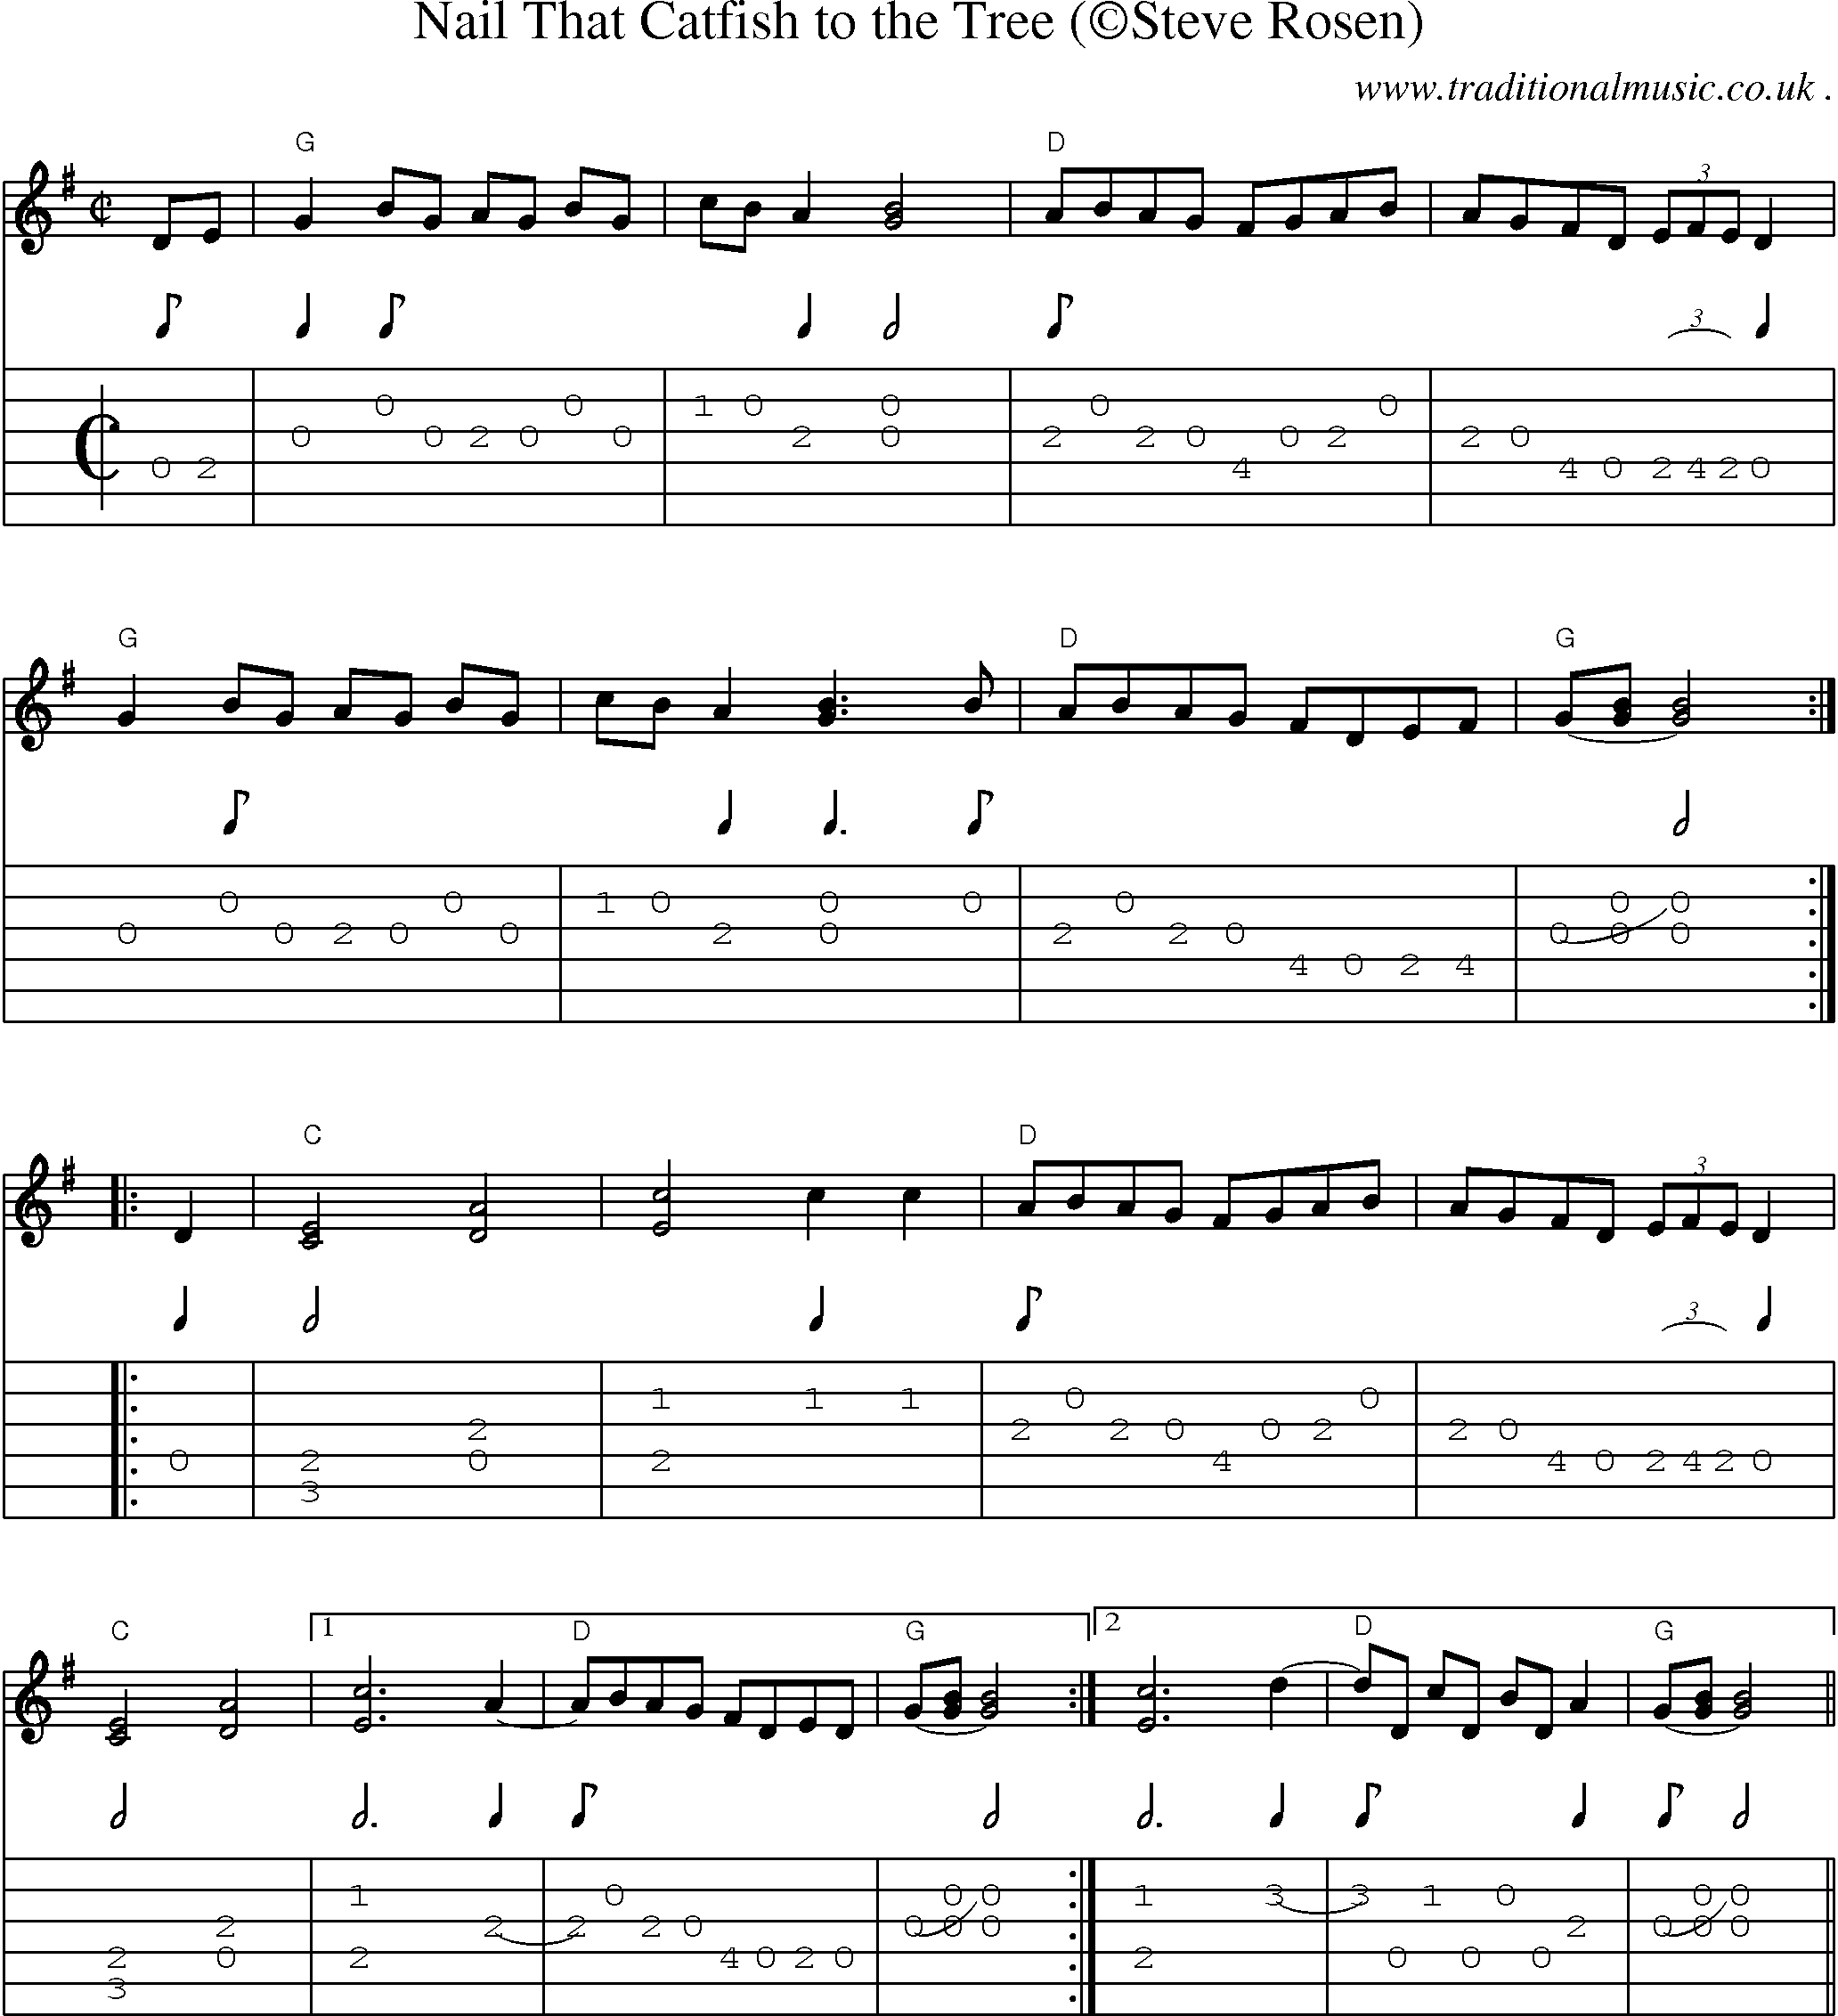 Music Score and Guitar Tabs for Nail That Catfish To The Tree1